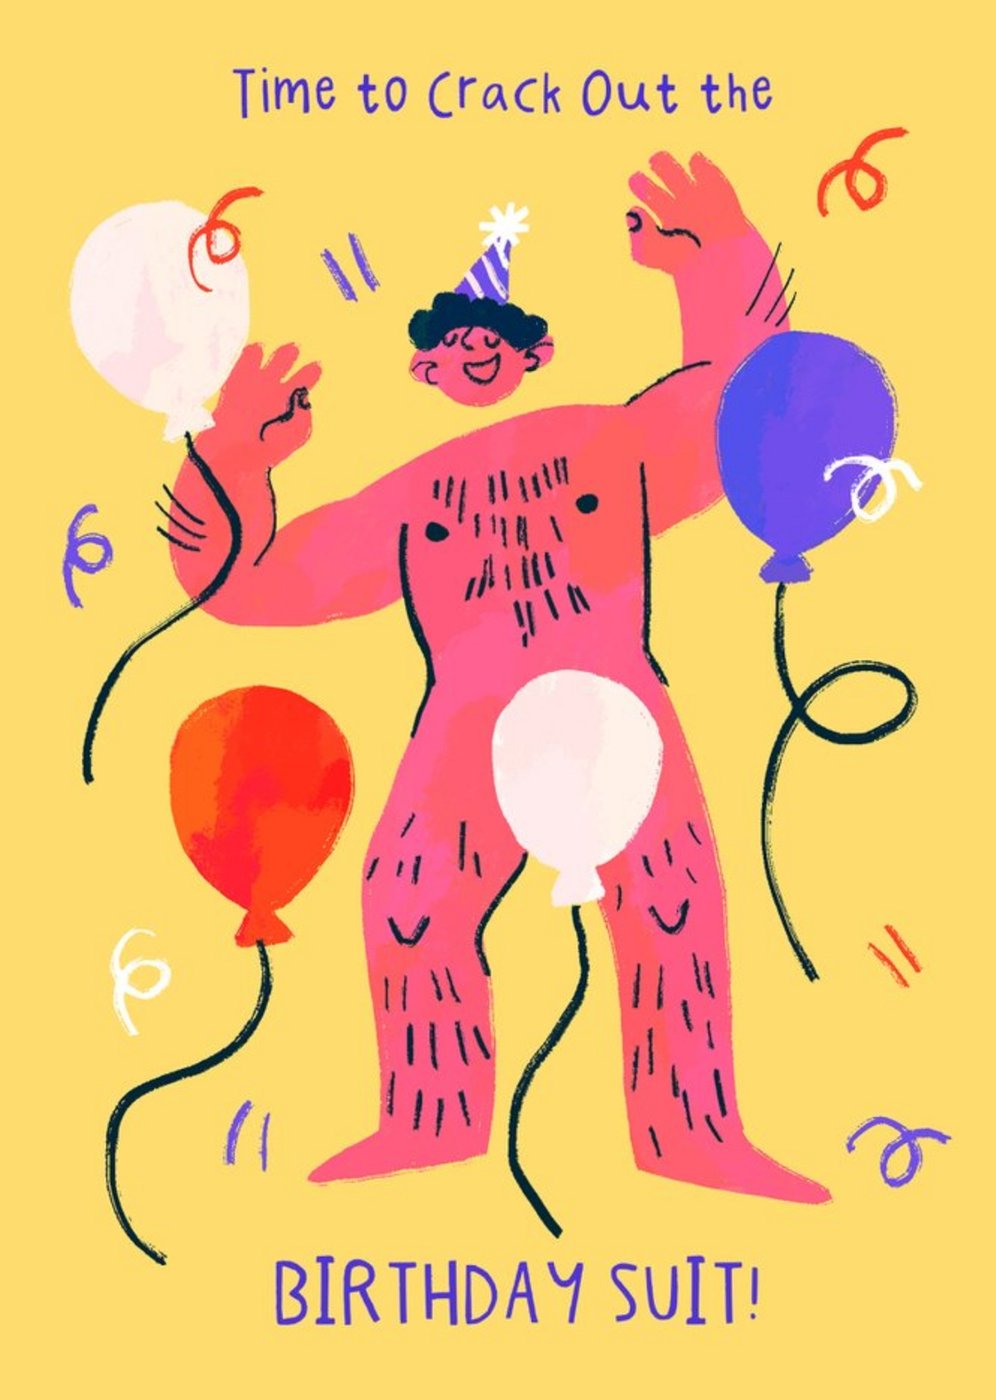 Crack Out The Birthday Suit Femaile Illustrated Card